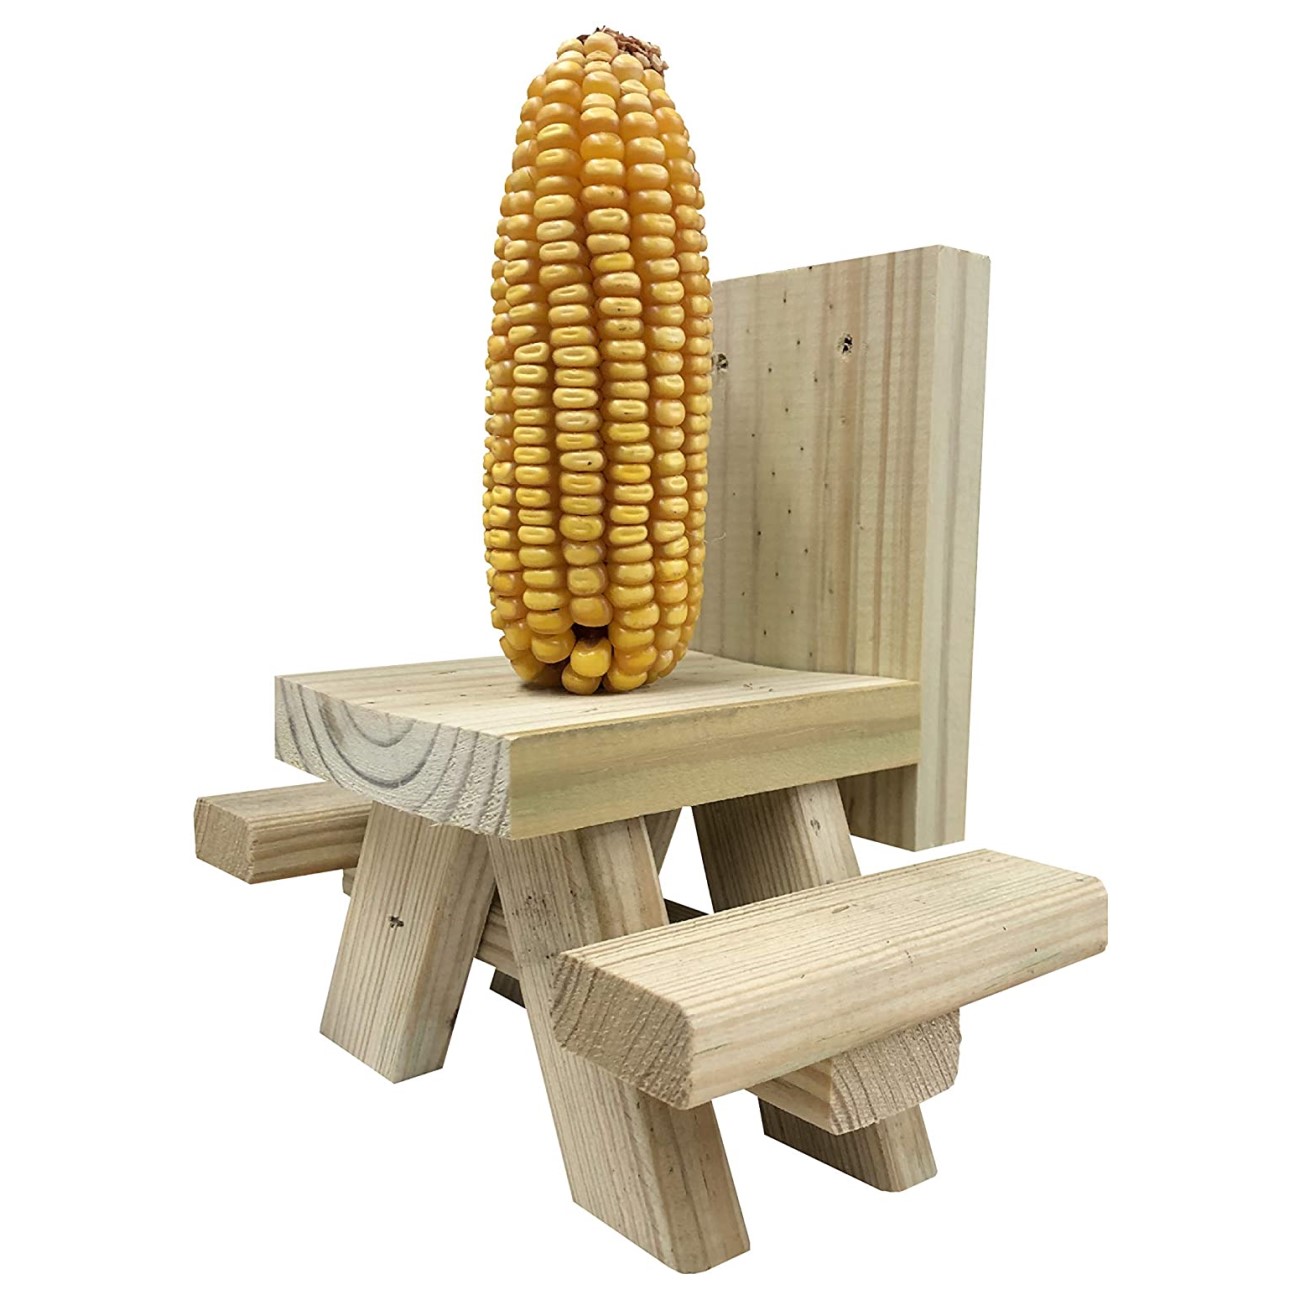 SquirrelSupply.com - Squirrel Feeder Picnic Table Hand Made in USA by Local Craftsmen– Premium Treated Wood – Just Add a Corn Cob and Enjoy